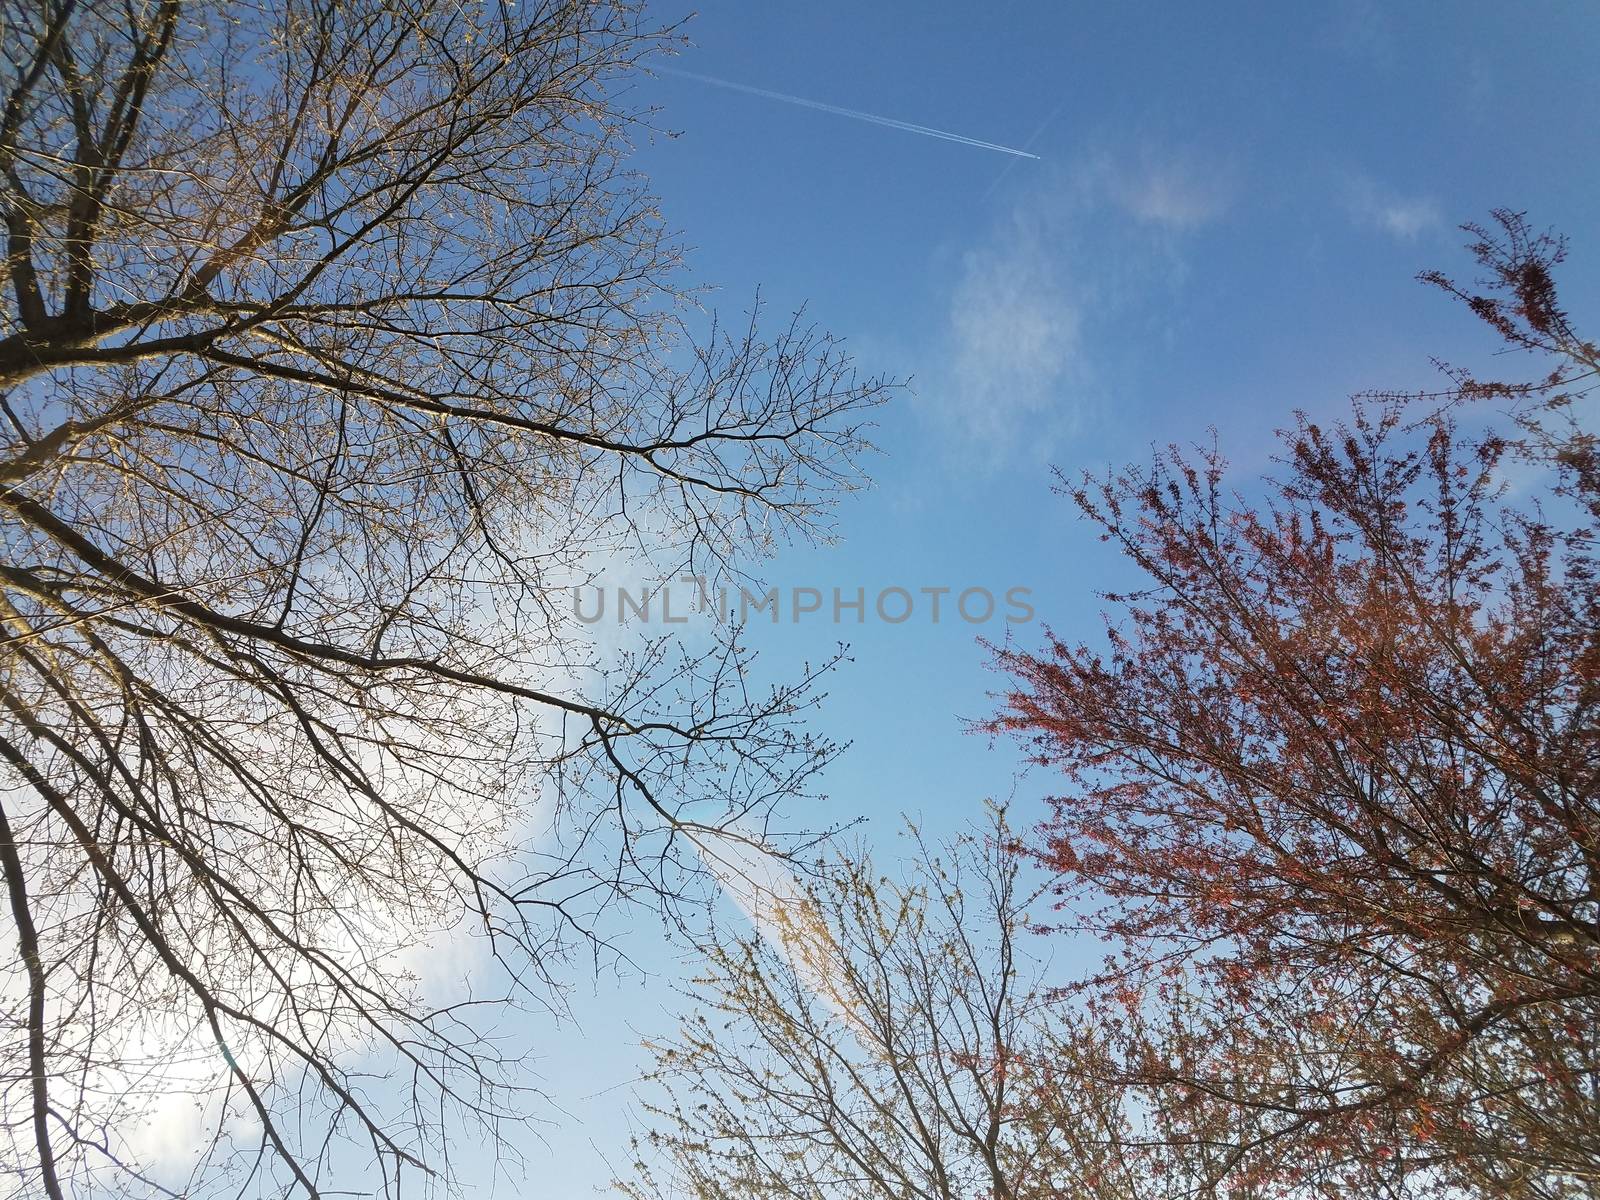 trees, clouds, and sky with airplane and contrail by stockphotofan1